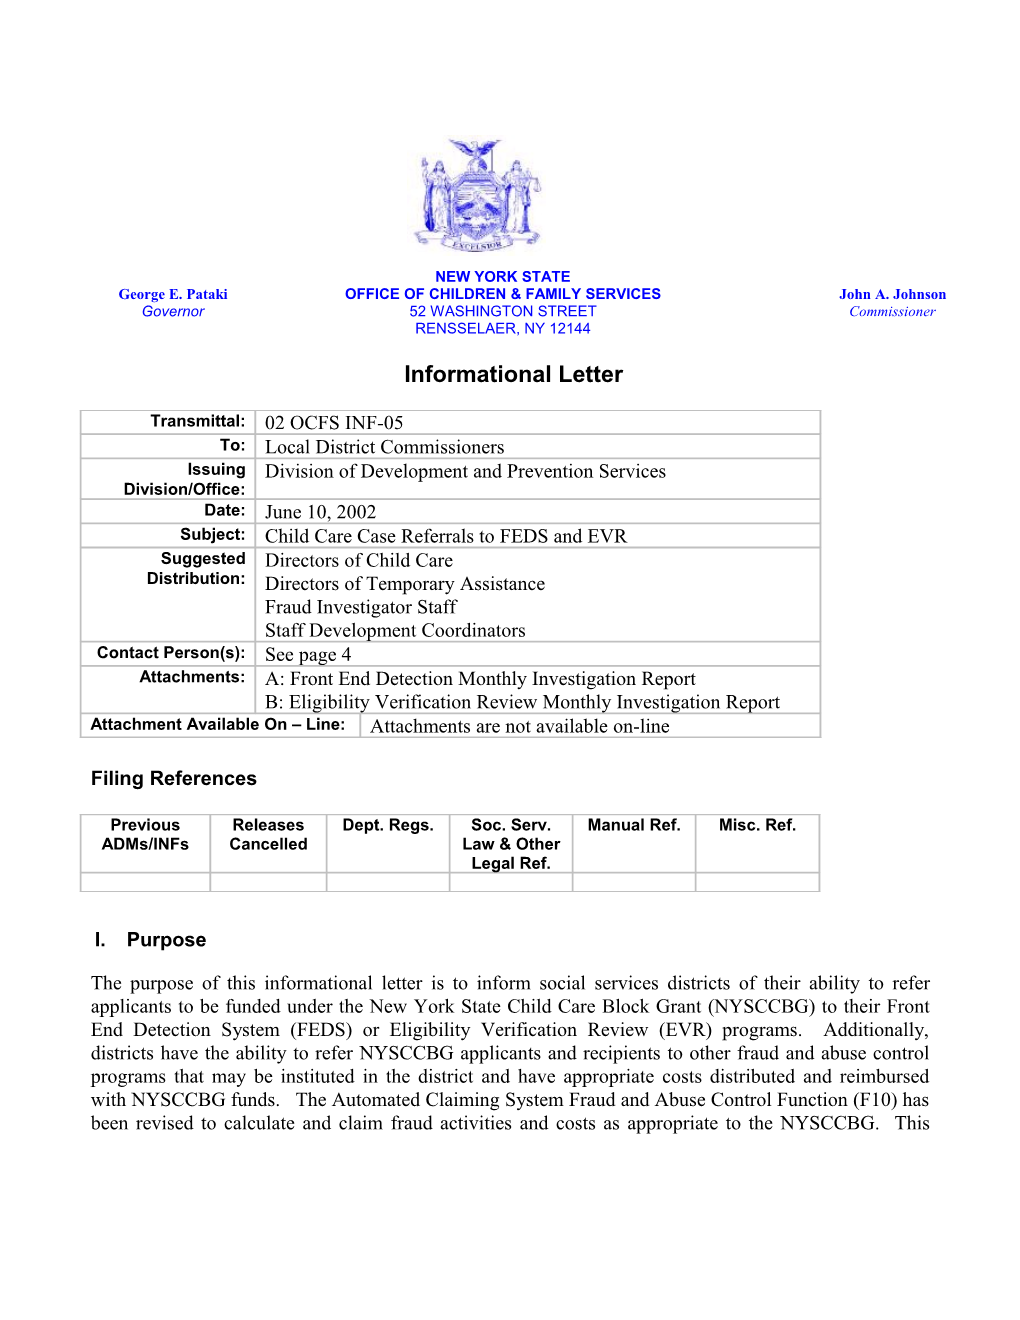 02 OCFS INF-10 Child Care Case Referrals to FEDS and EVR